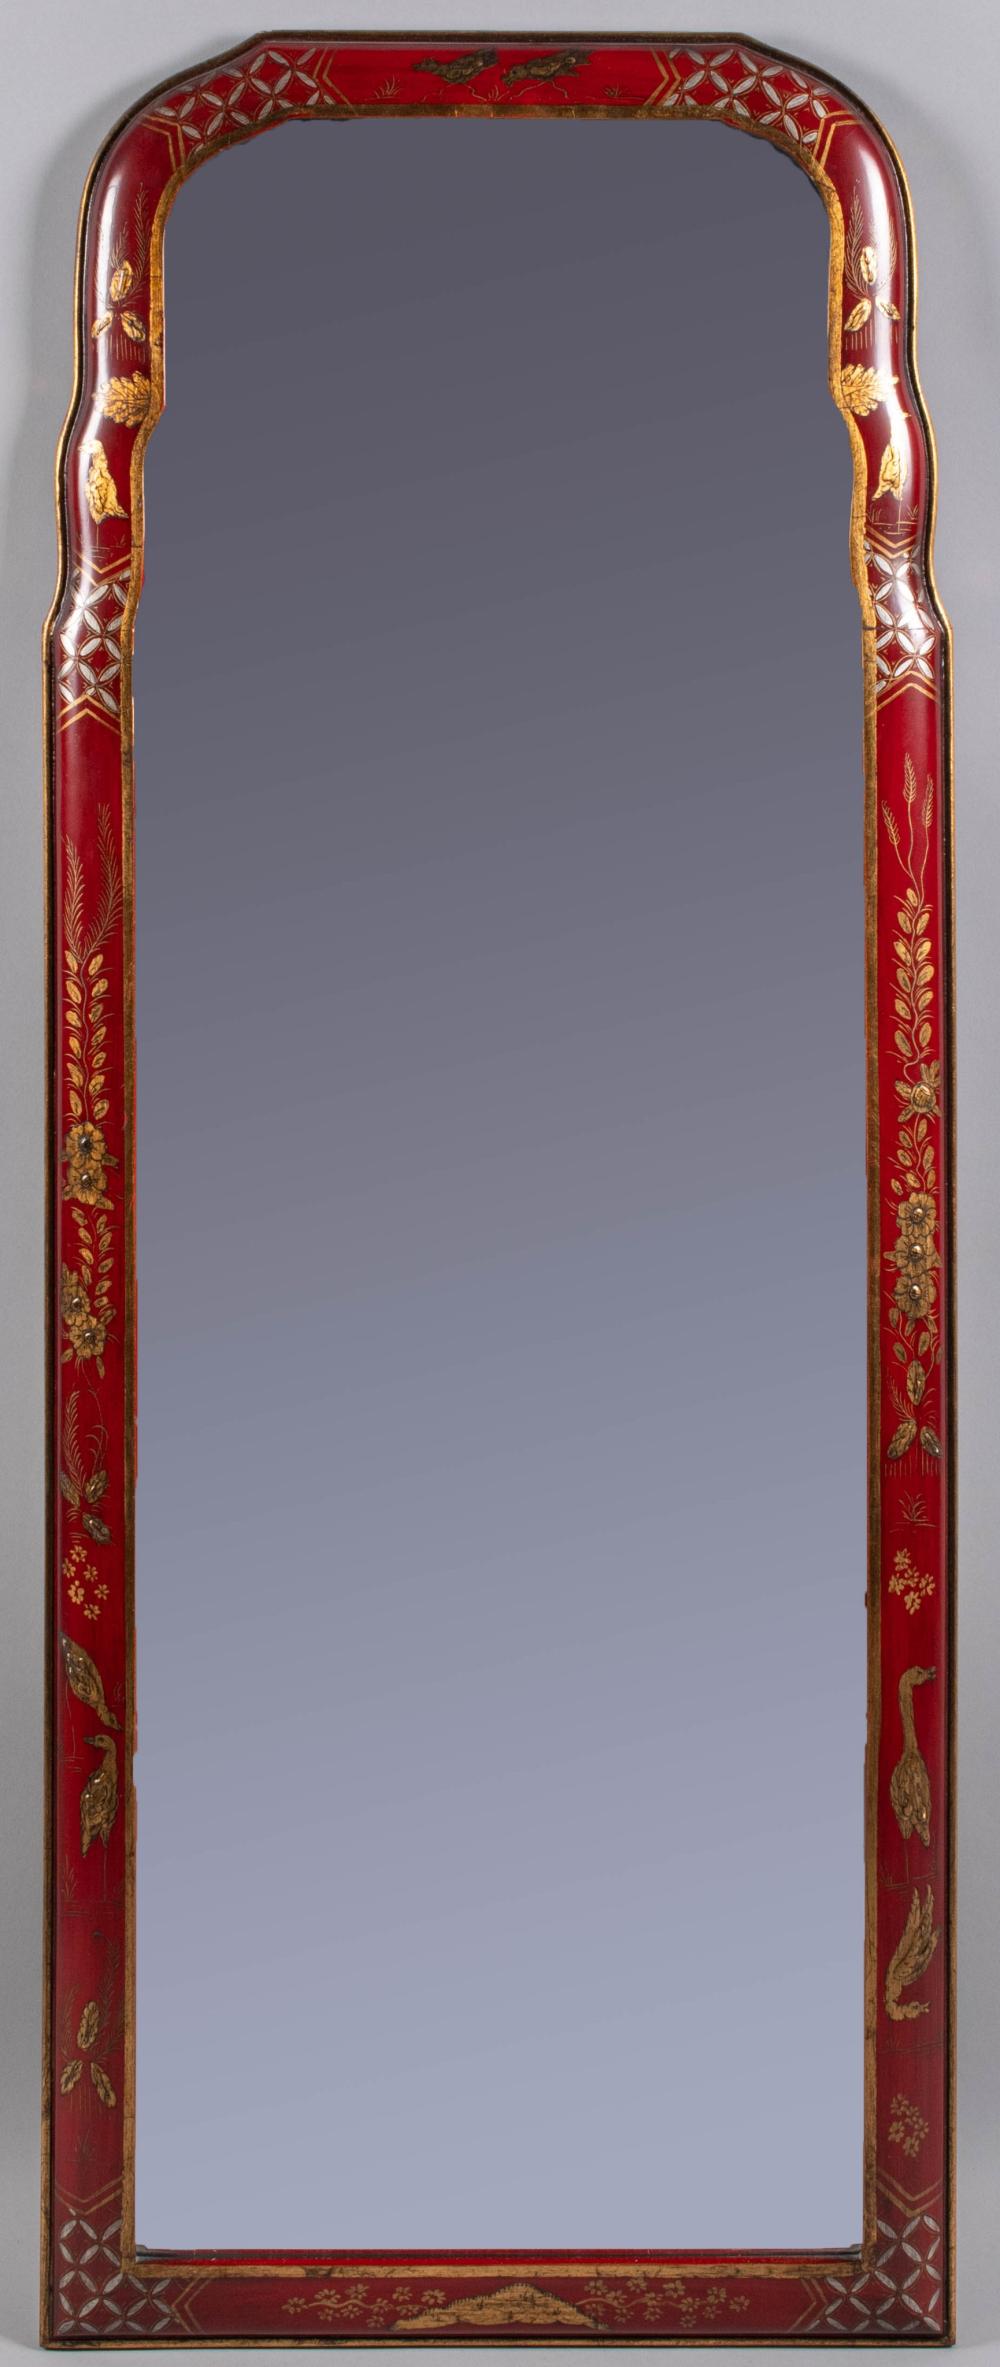 QUEEN ANNE STYLE GILT SCARLET LACQUERED 33d0c8